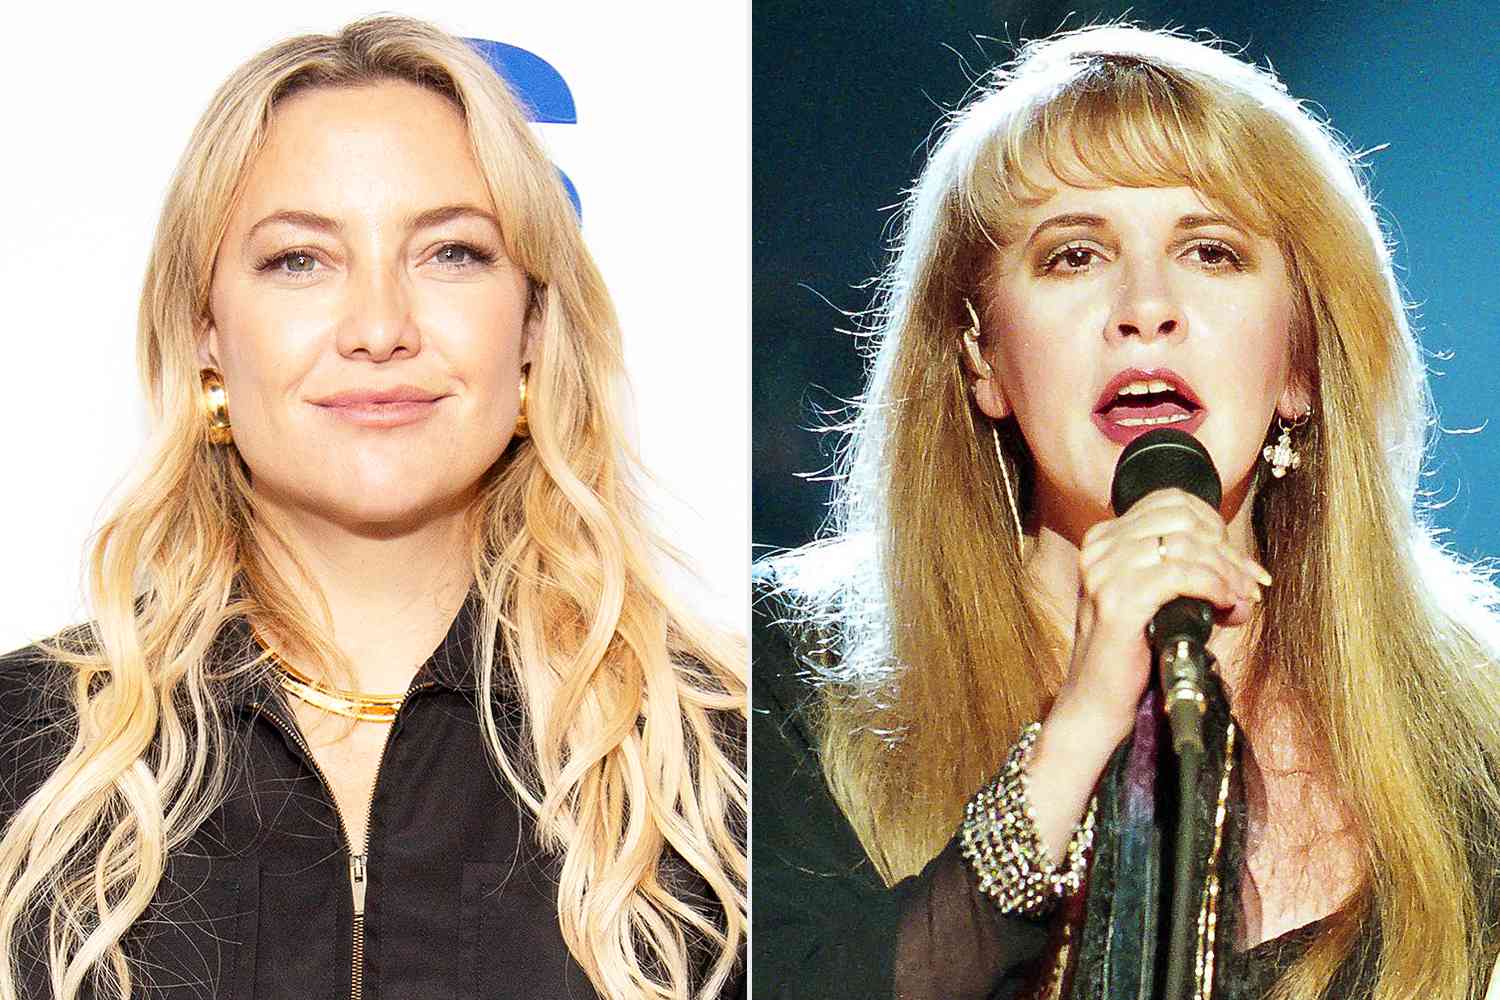 Kate Hudson Says Her 'Ultimate' Dream Role Is Stevie Nicks: 'I Would Probably Go Way Too Far'